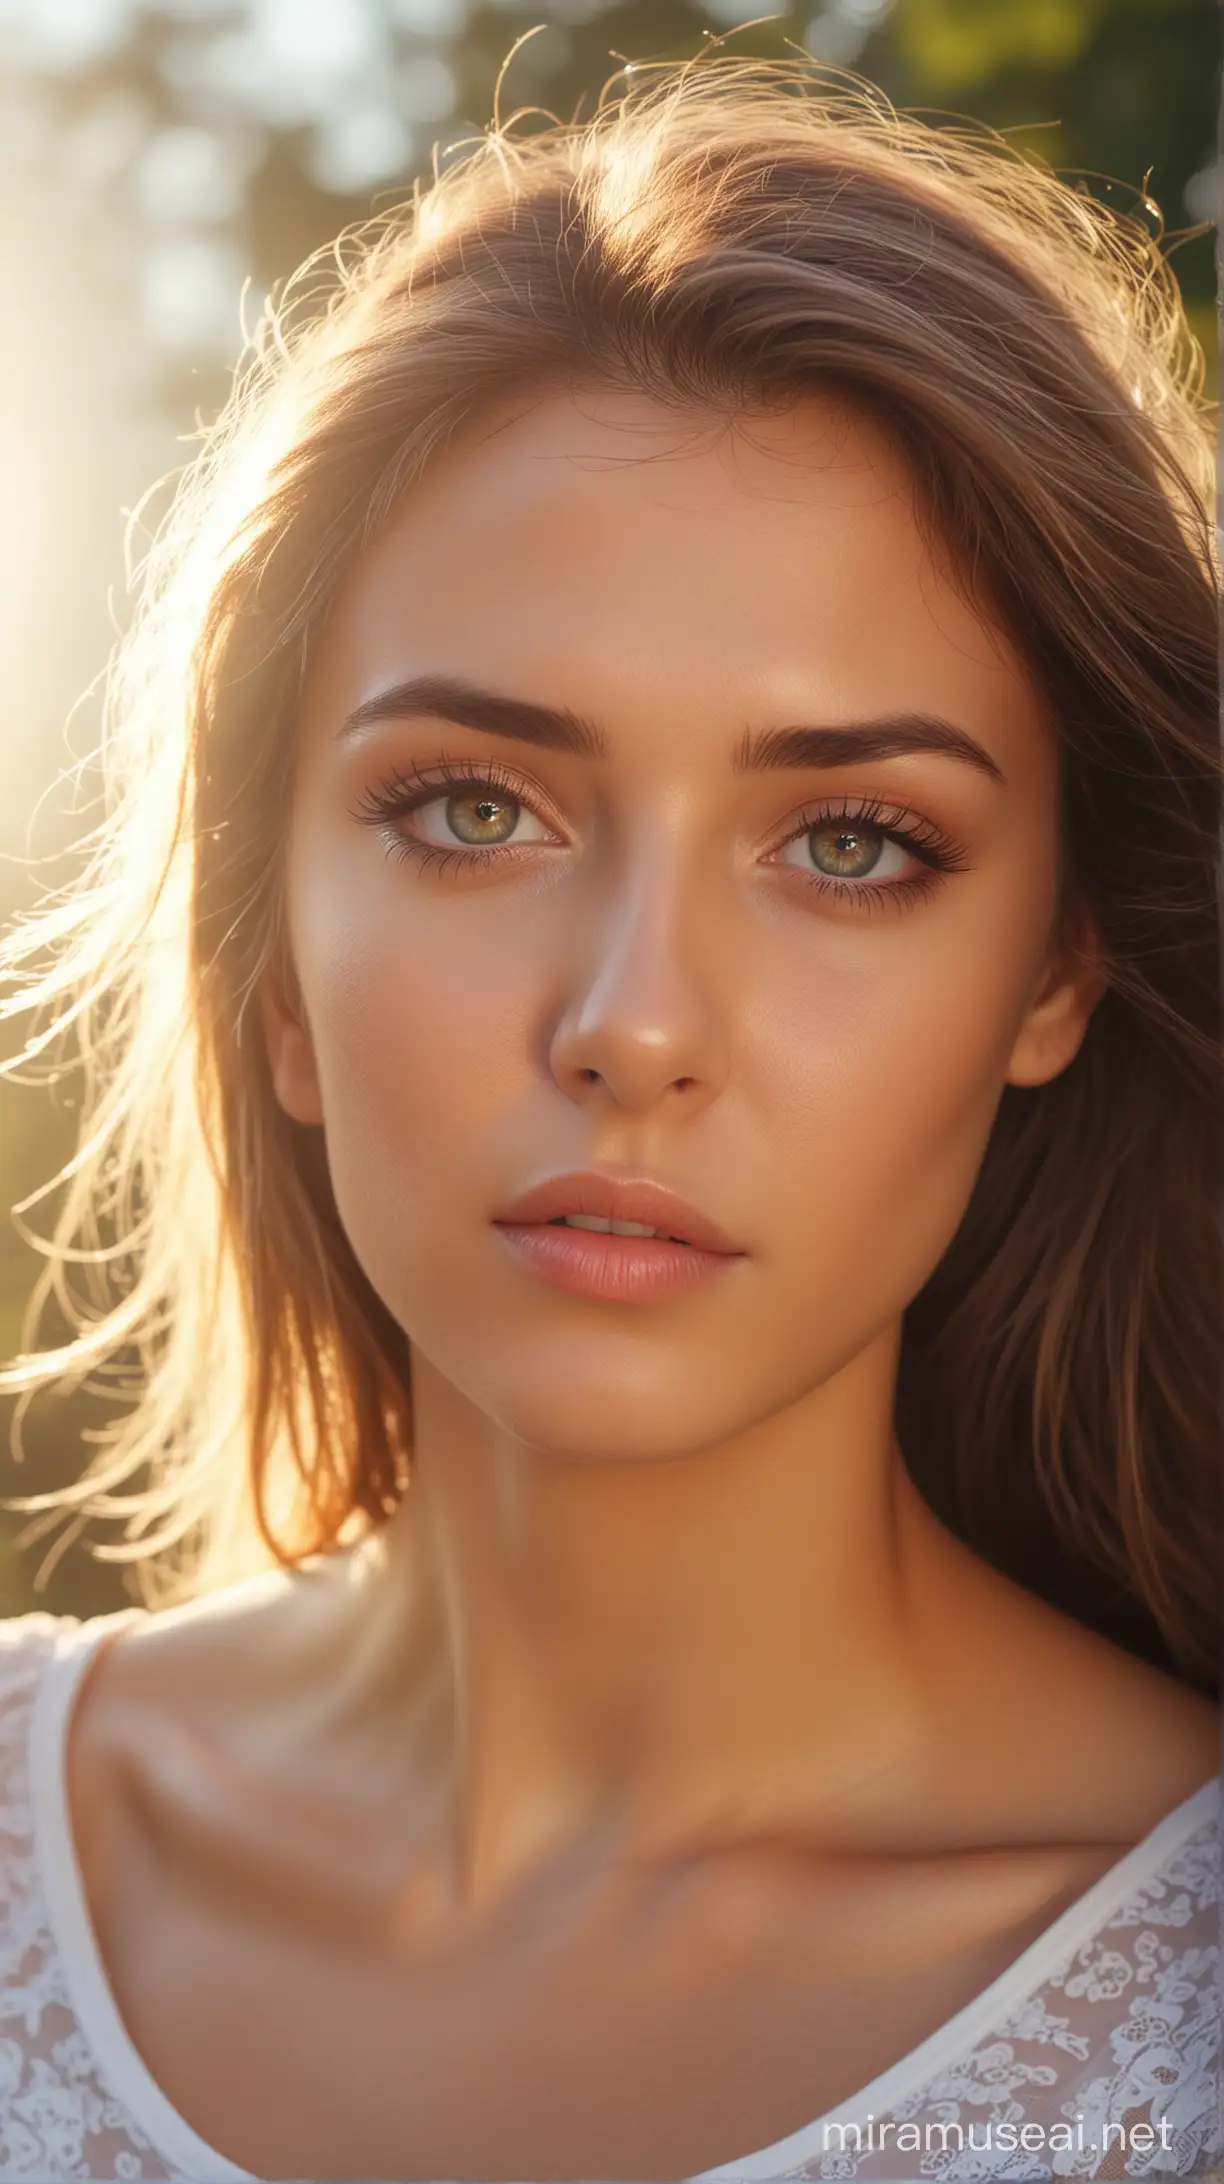 Graceful Angelic Women Radiant Eyes in Natural Sunlight